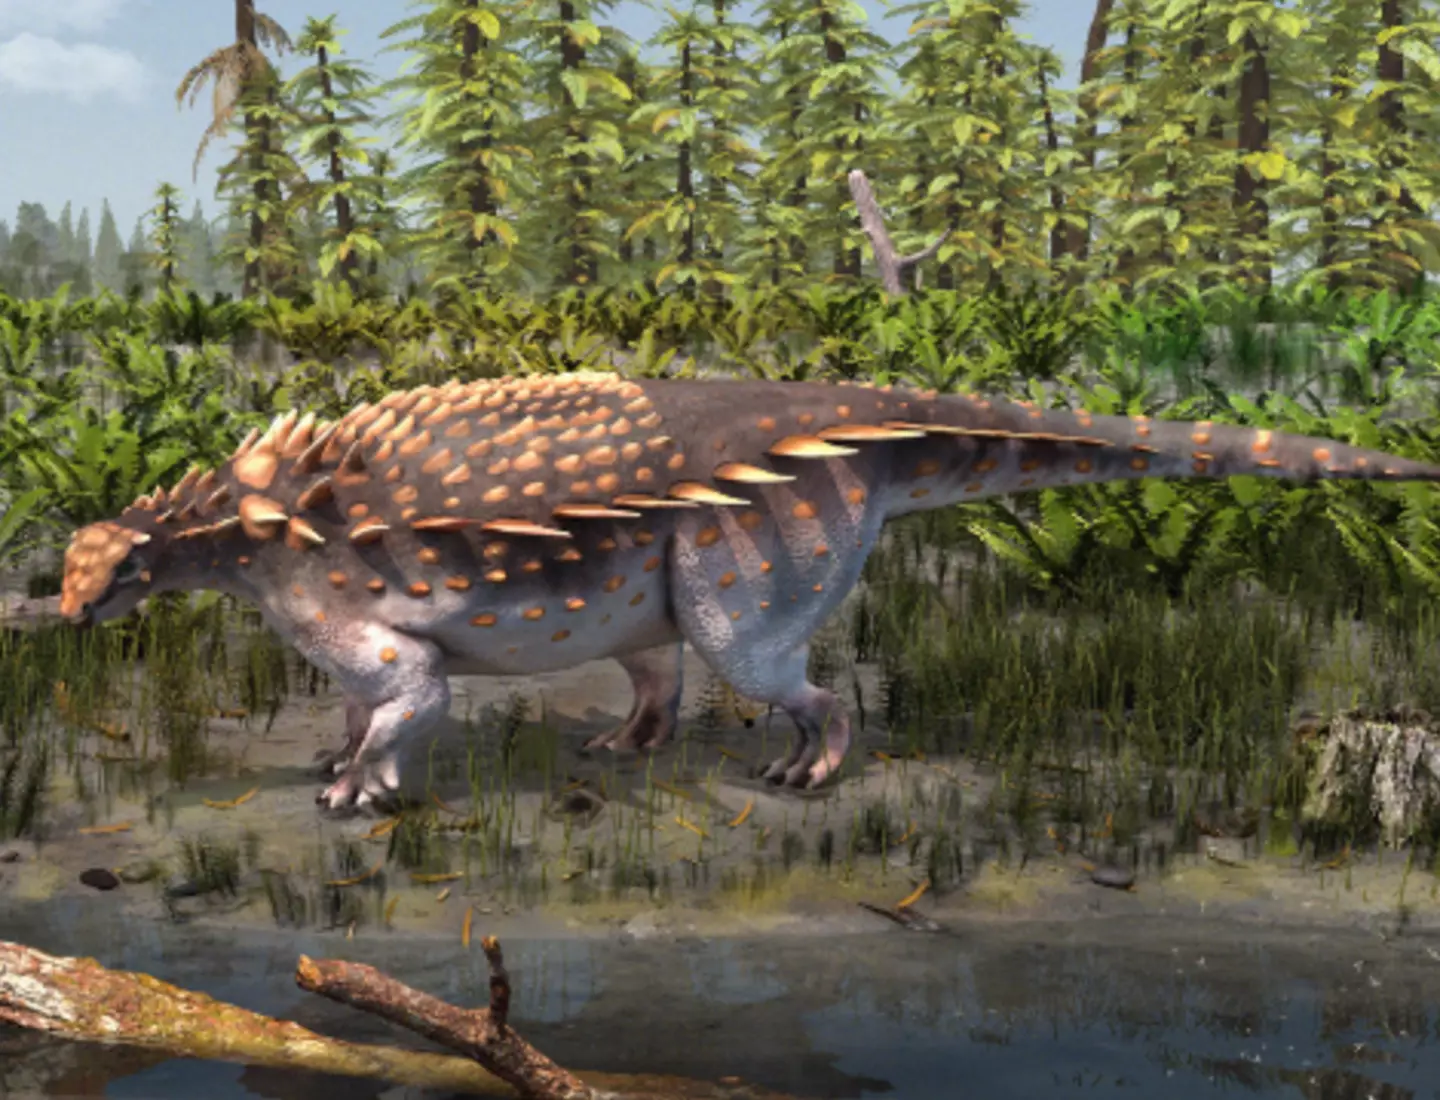 The species is the second ankylosaur discovered on the island.